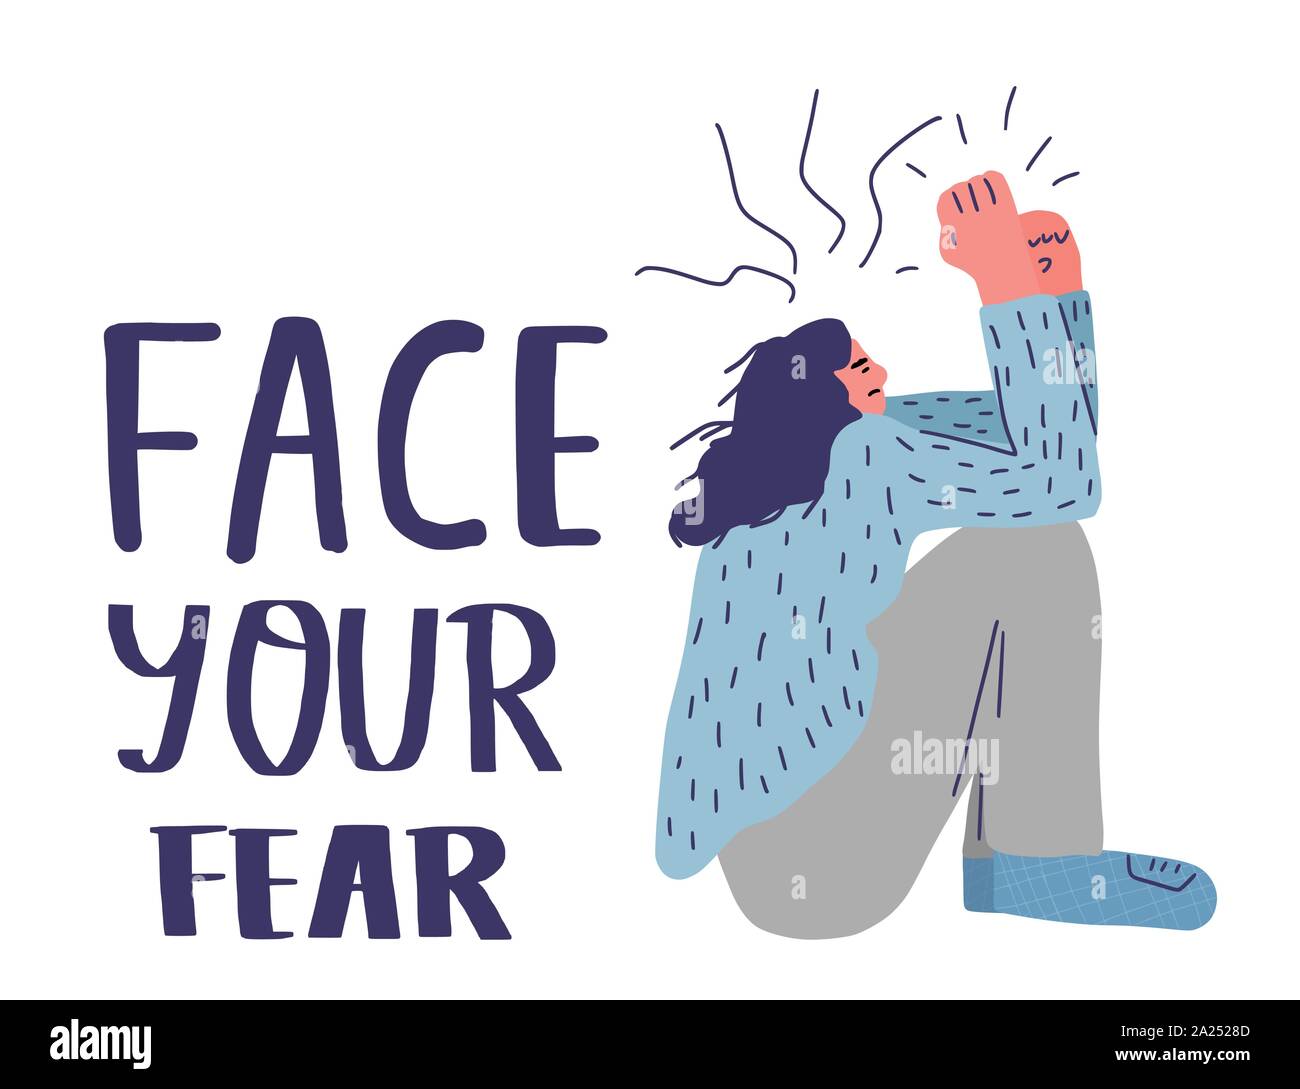 Face your fear. Psychological problems concept. Young woman sitting on the floor with phobia and hand drawn text solated on white background. Vector i Stock Vector